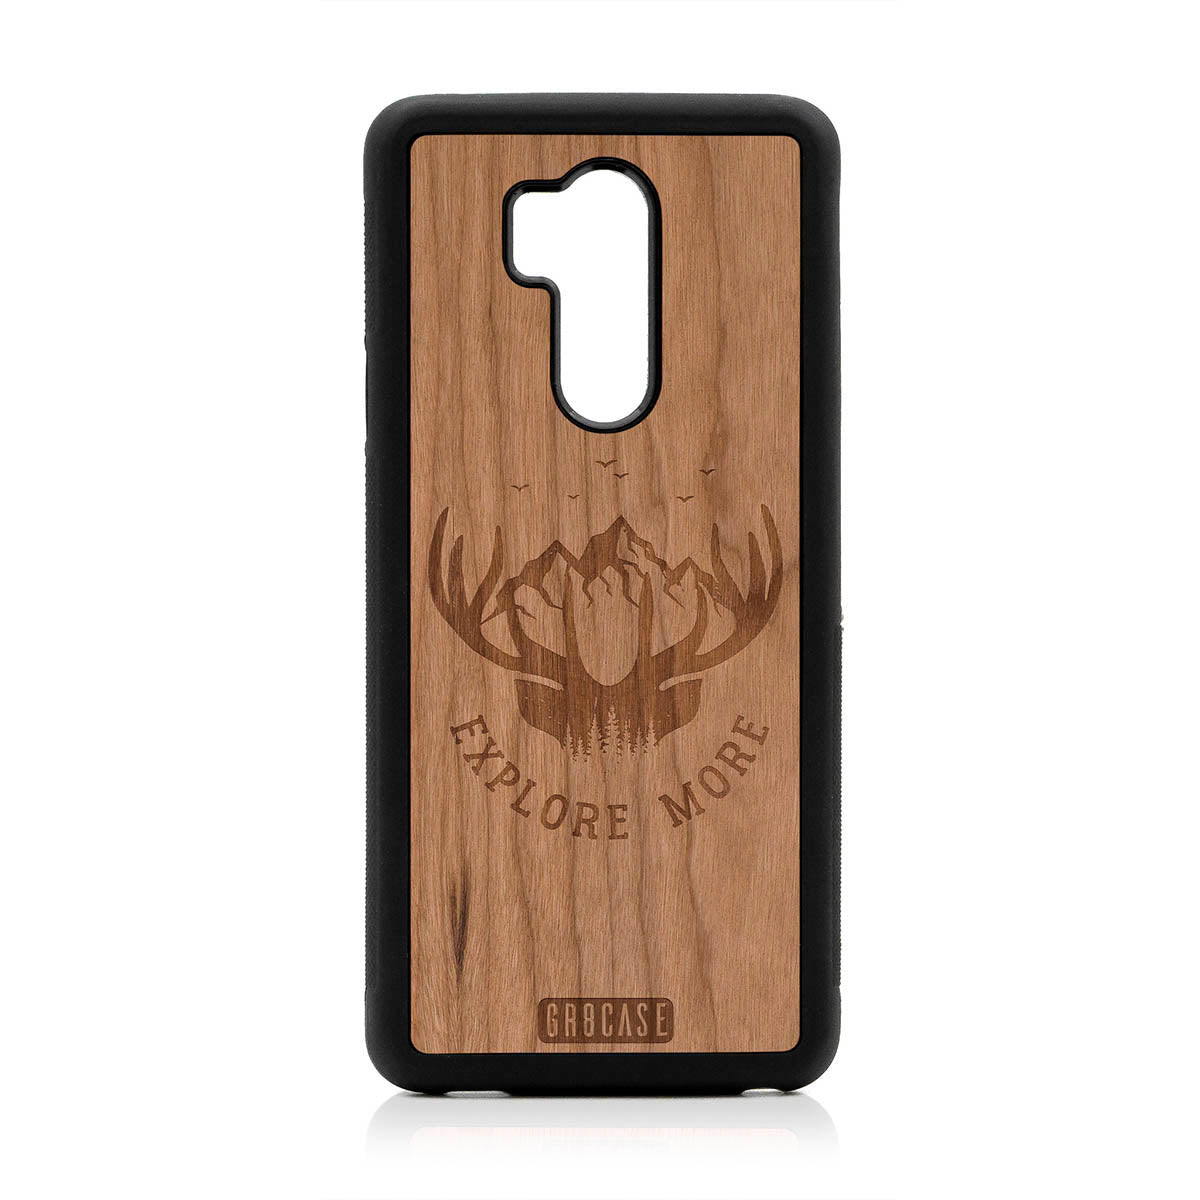 Explore More (Forest, Mountains & Antlers) Design Wood Case For LG G7 ThinQ by GR8CASE